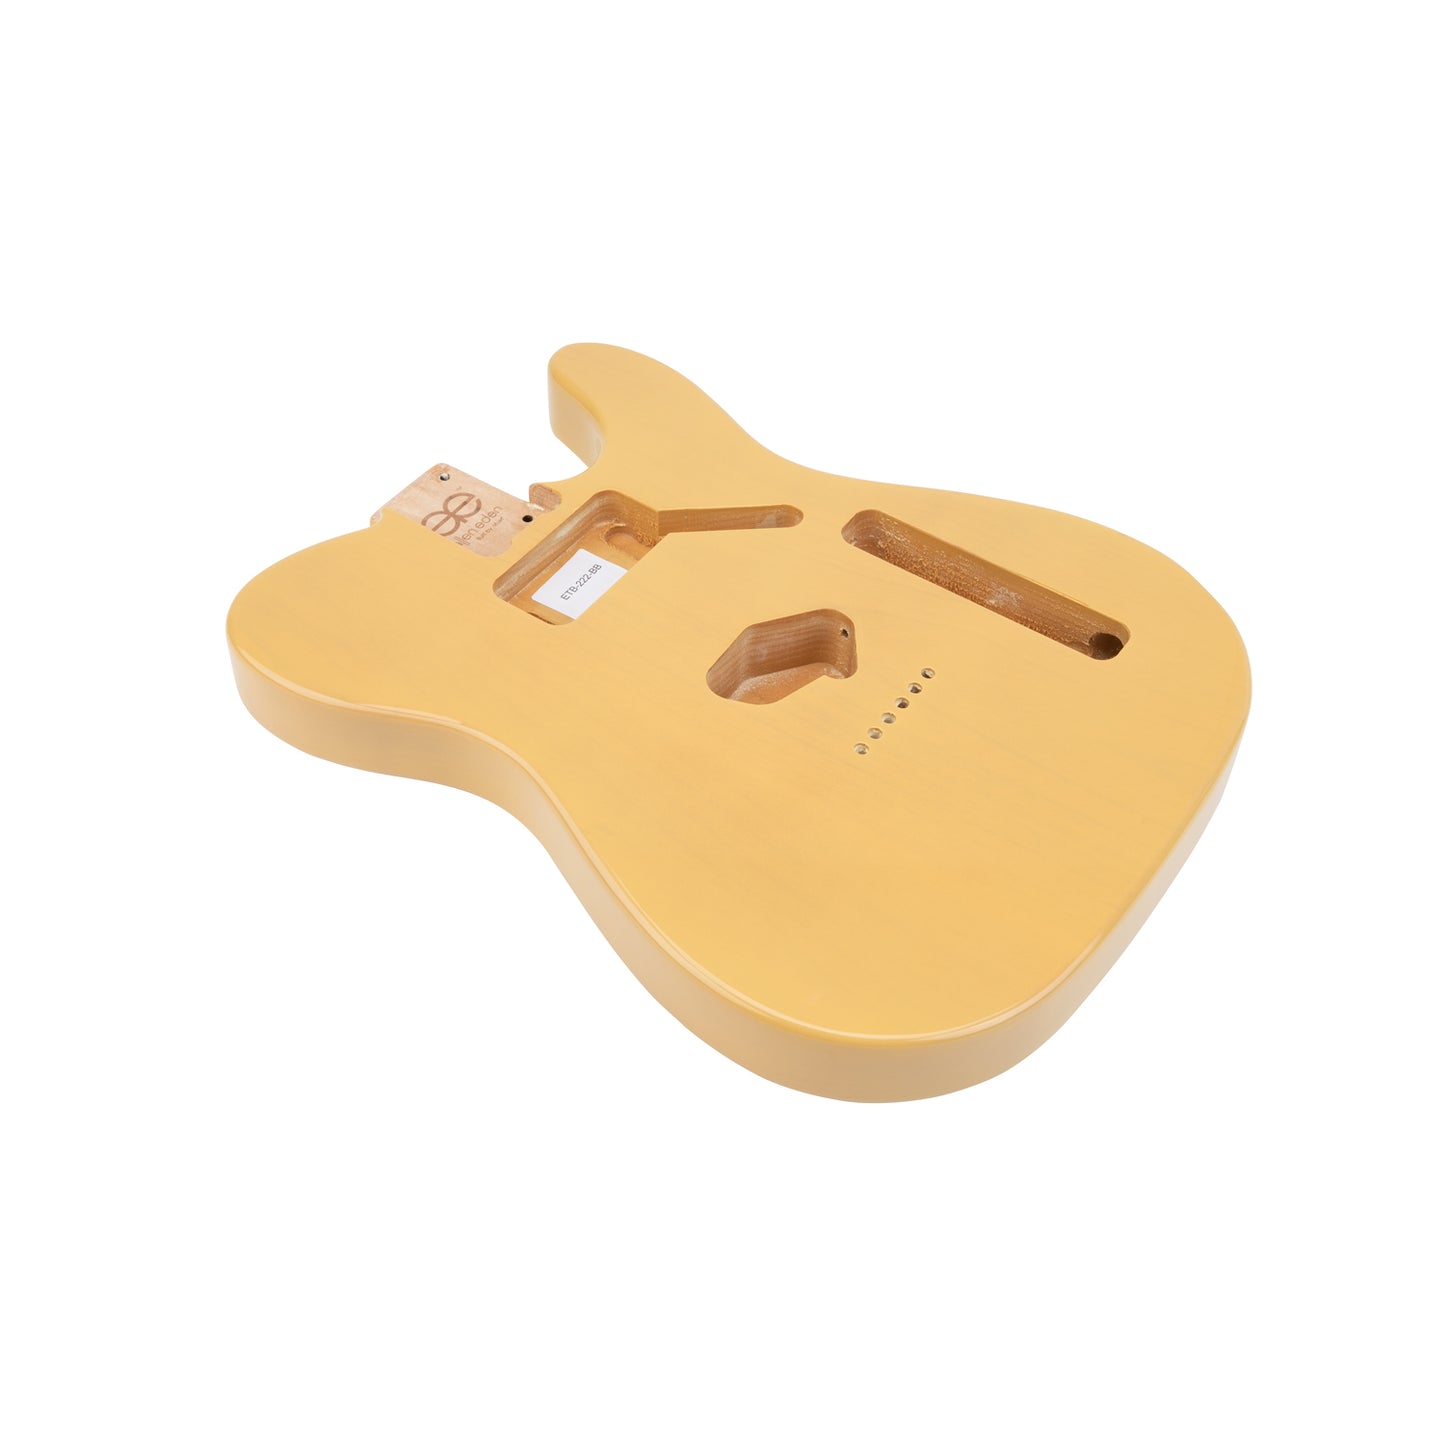 AE Guitars® T-Style Alder Replacement Guitar Body Butterscotch Blonde